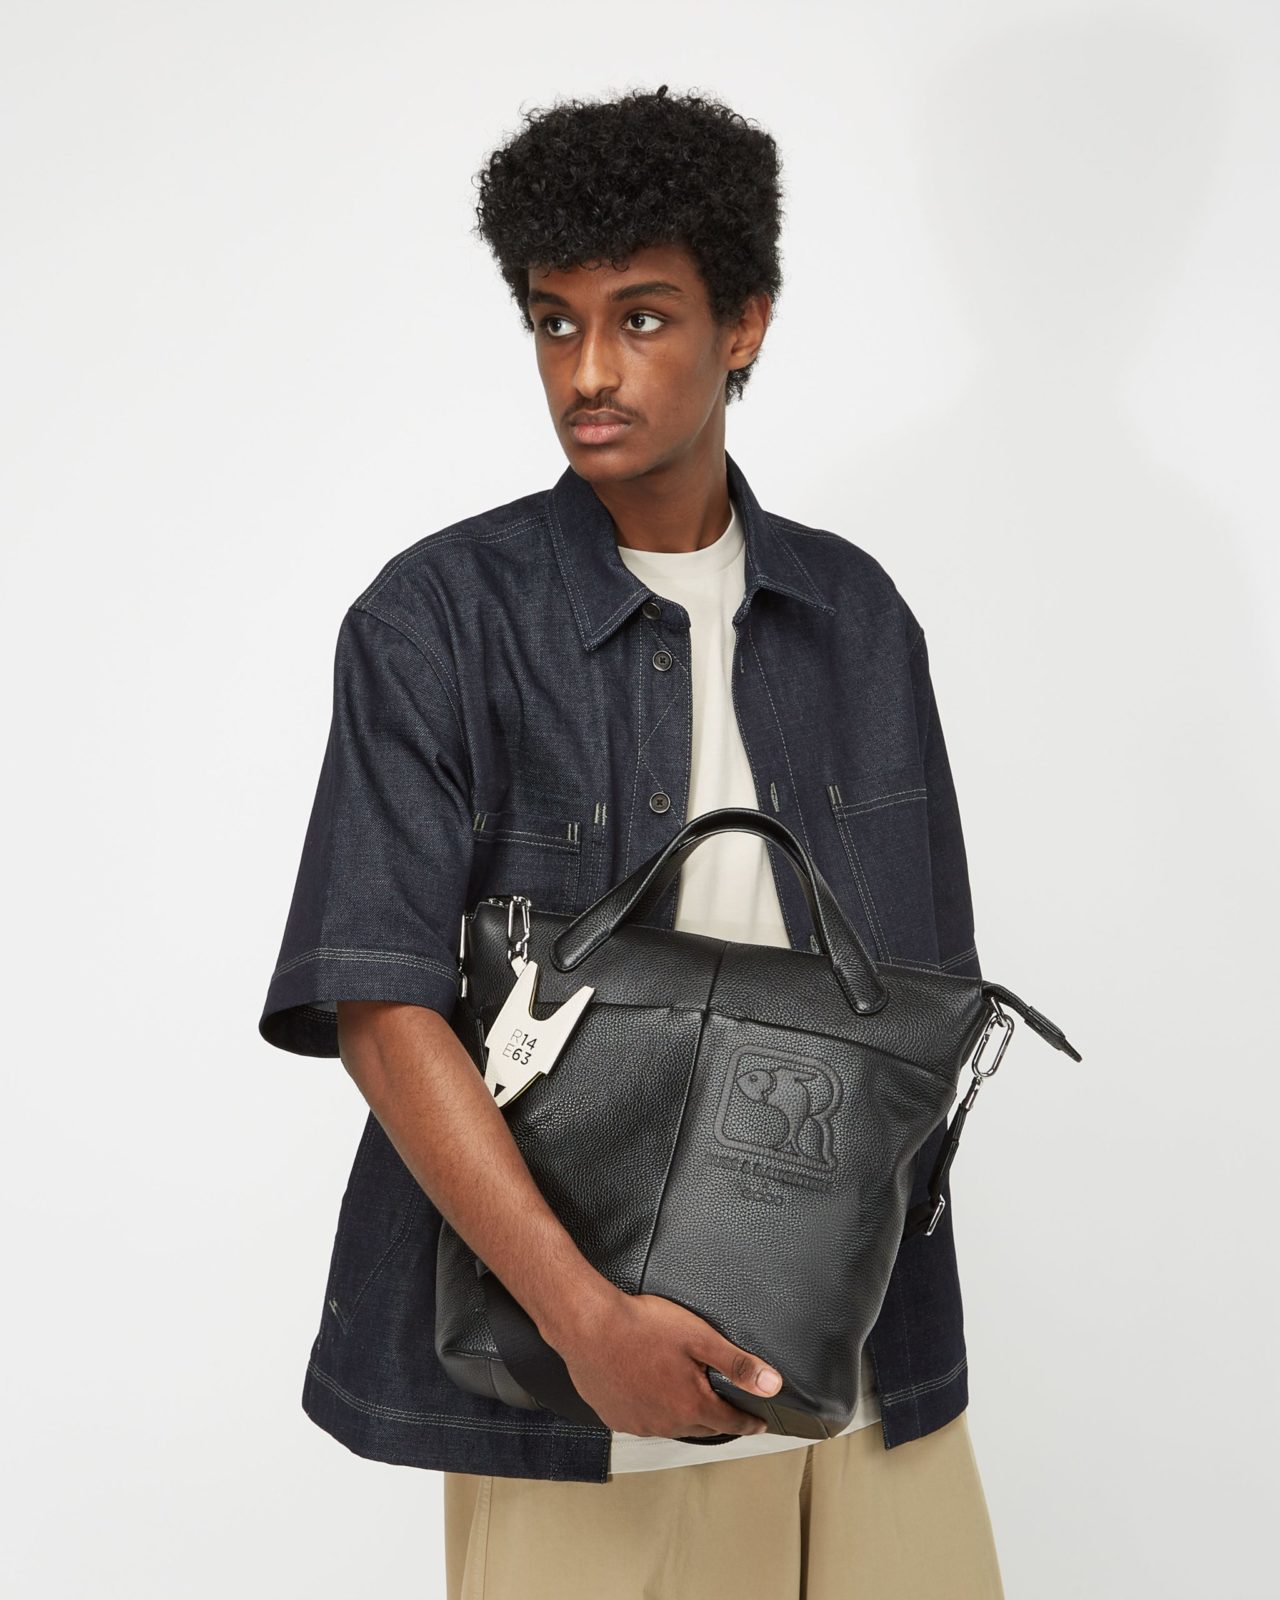 A lookbook fashion image featuring a man wearing a fashionable outfit holding a bag with his hand in front of a white background. Photographed by I Heart Studios.